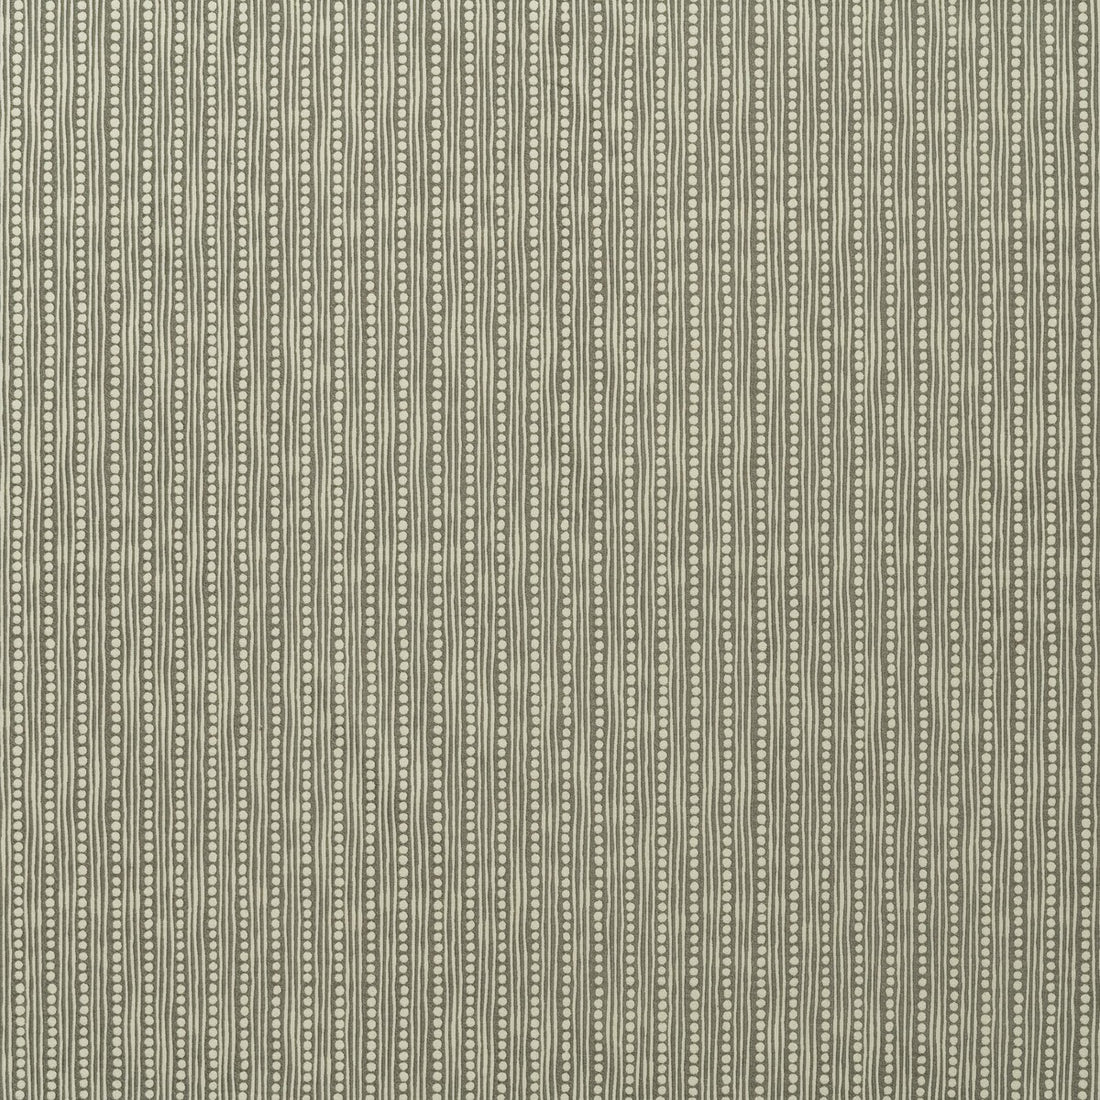 Wickham fabric in slate color - pattern BFC-3678.21.0 - by Lee Jofa in the Blithfield collection